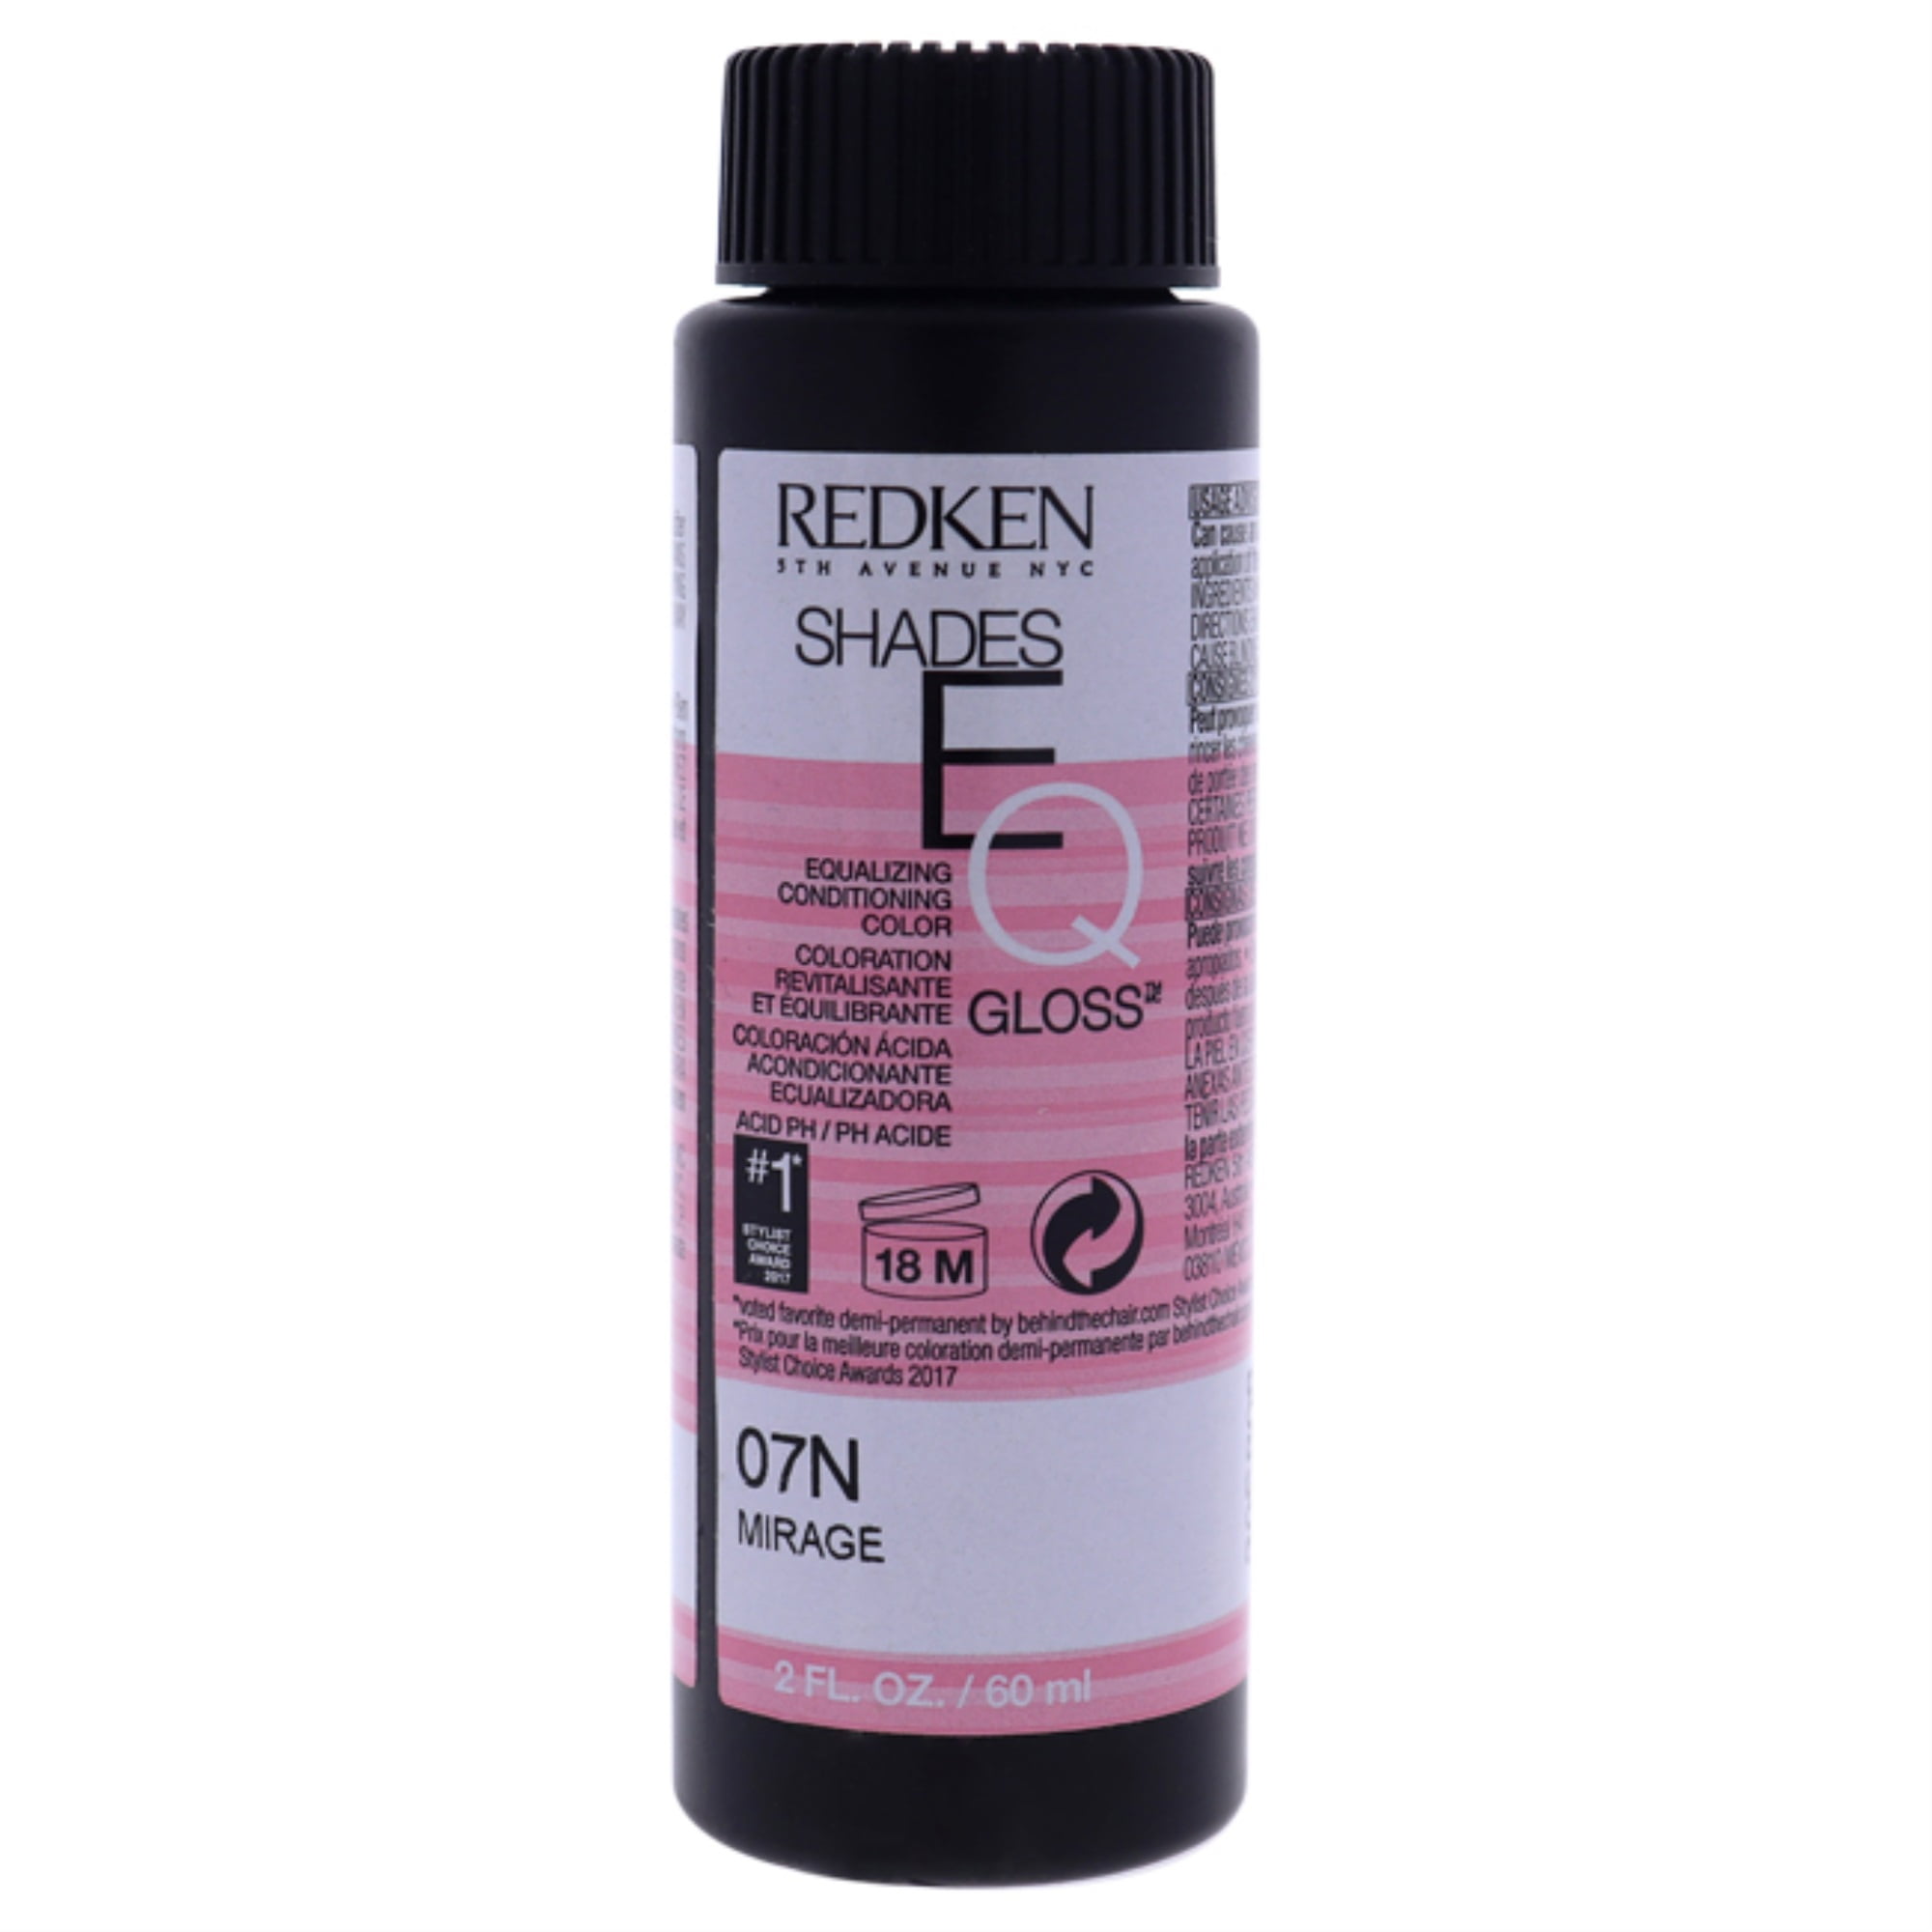 redken-shades-eq-equalizing-conditioning-color-gloss-07n-mirge